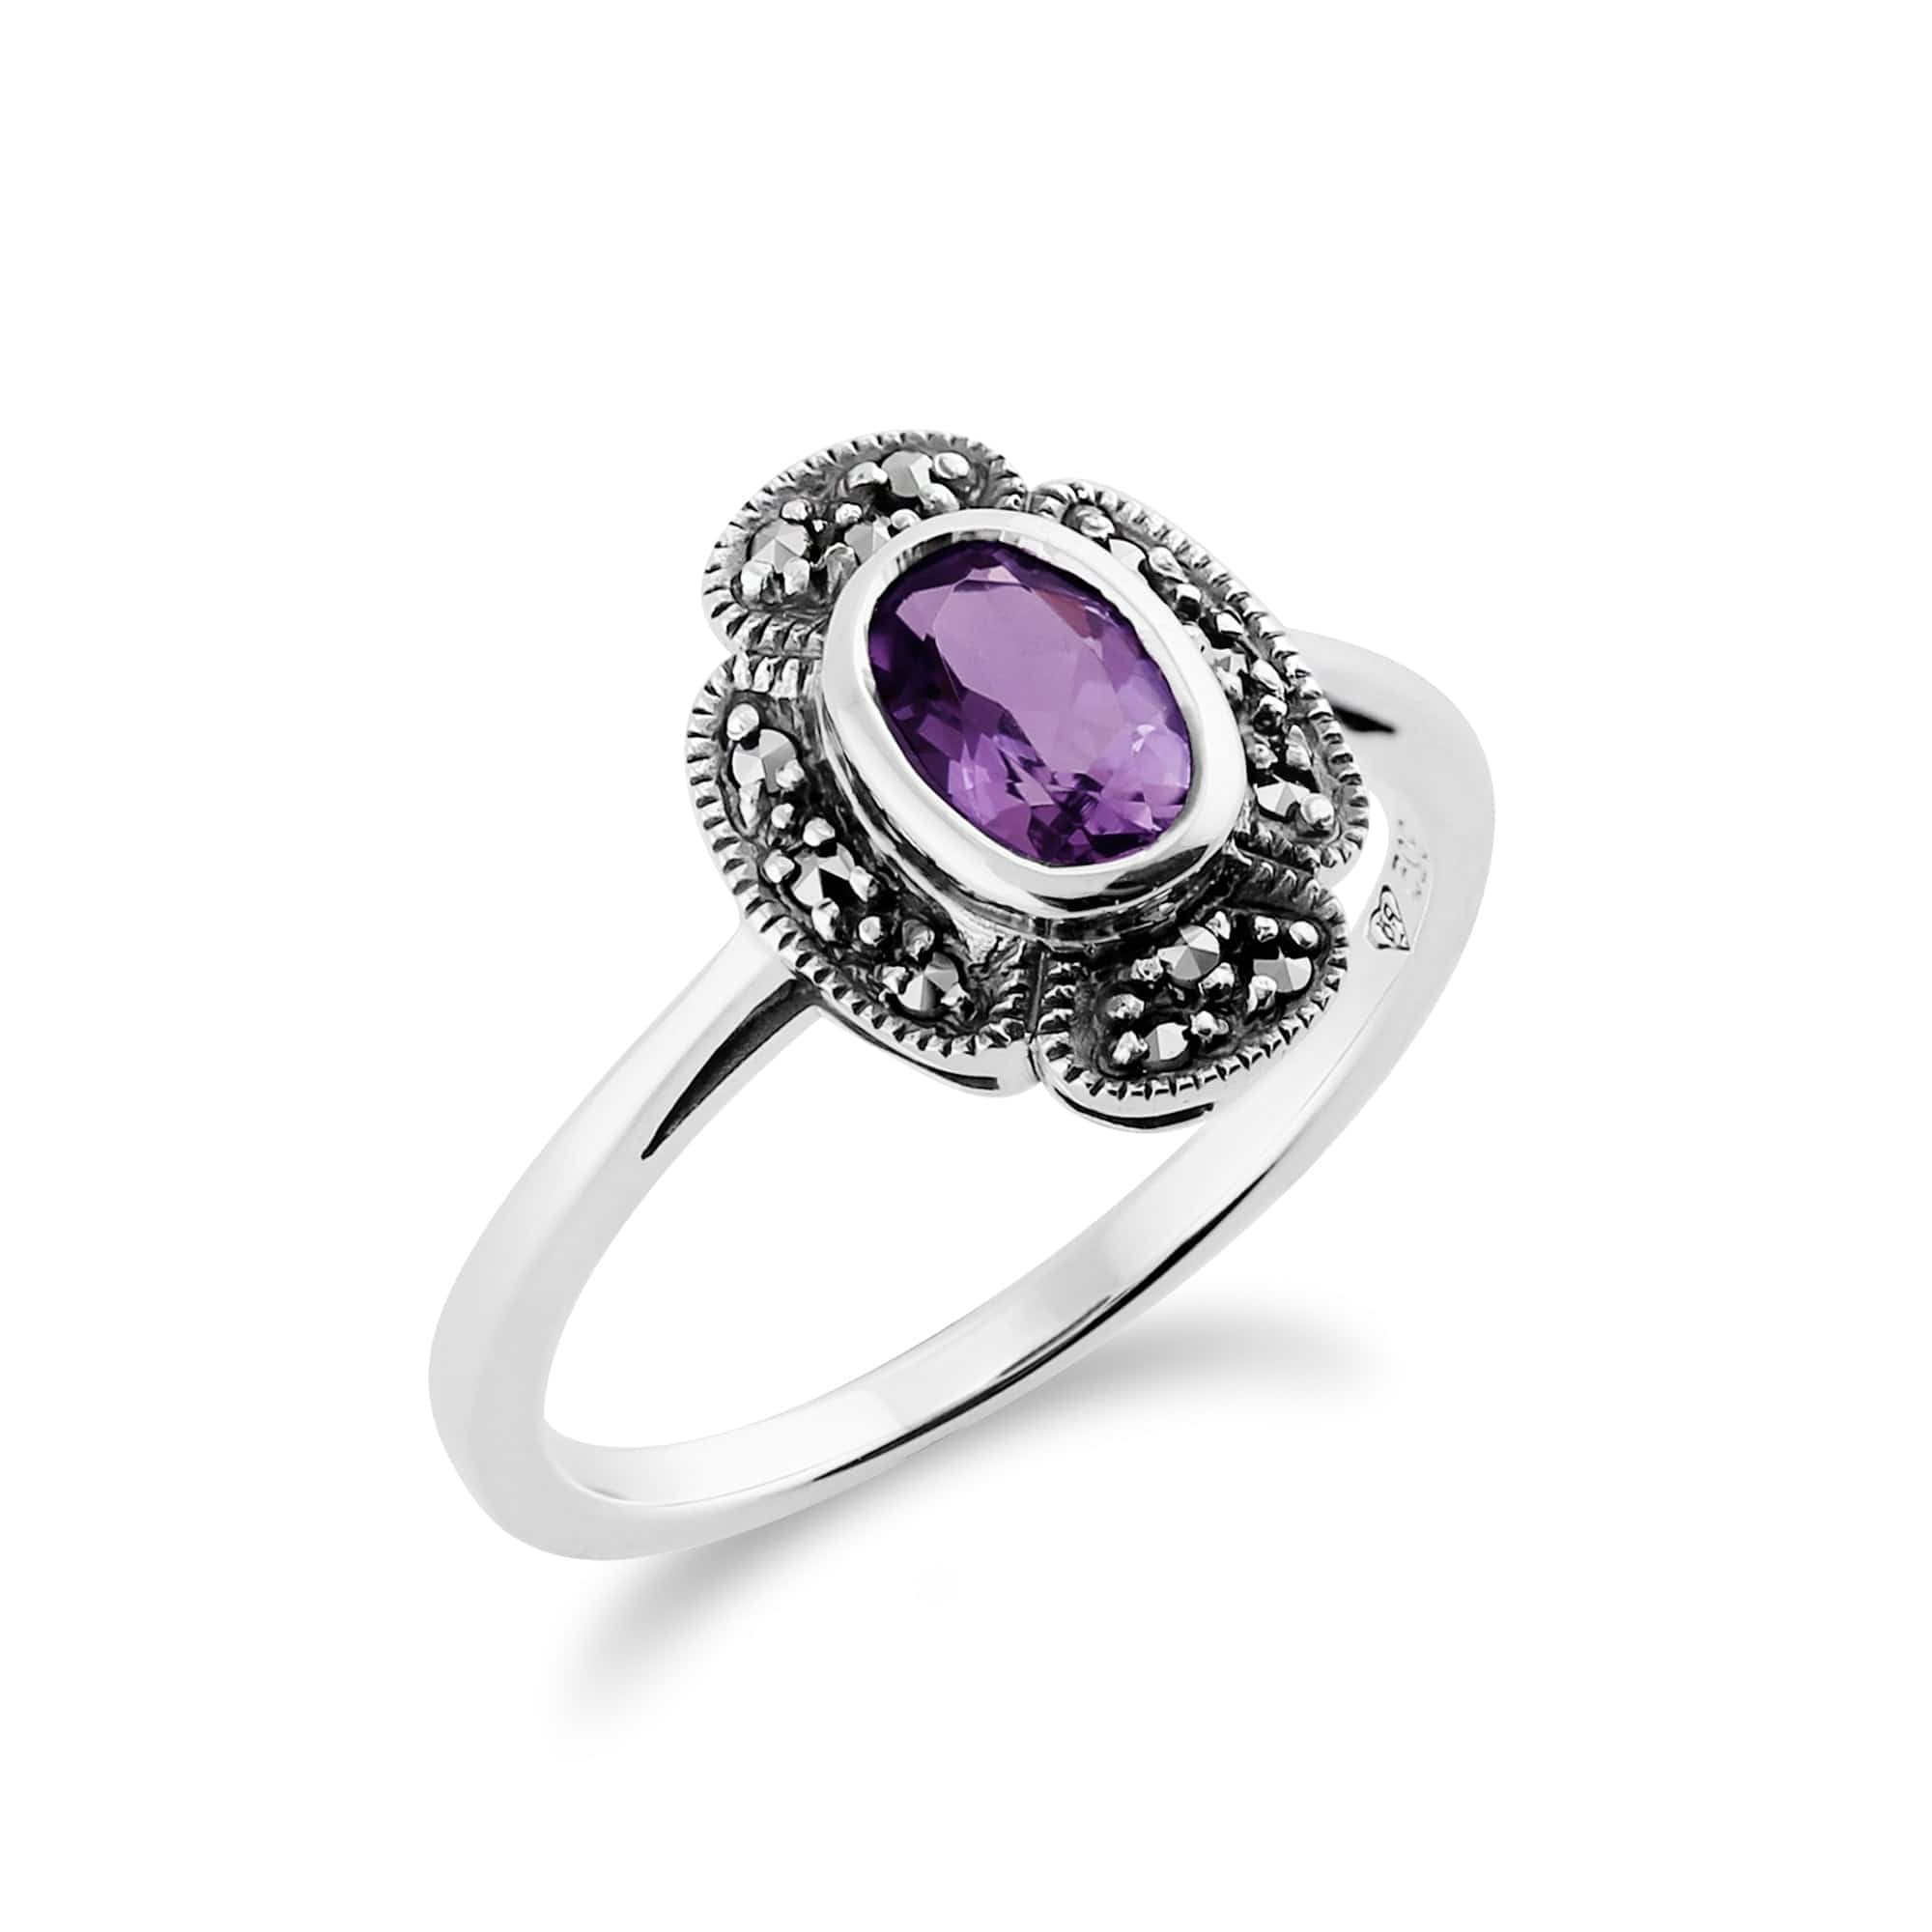 Art Deco Style Oval Amethyst & Marcasite Ring in 925 Sterling Silver - Gemondo